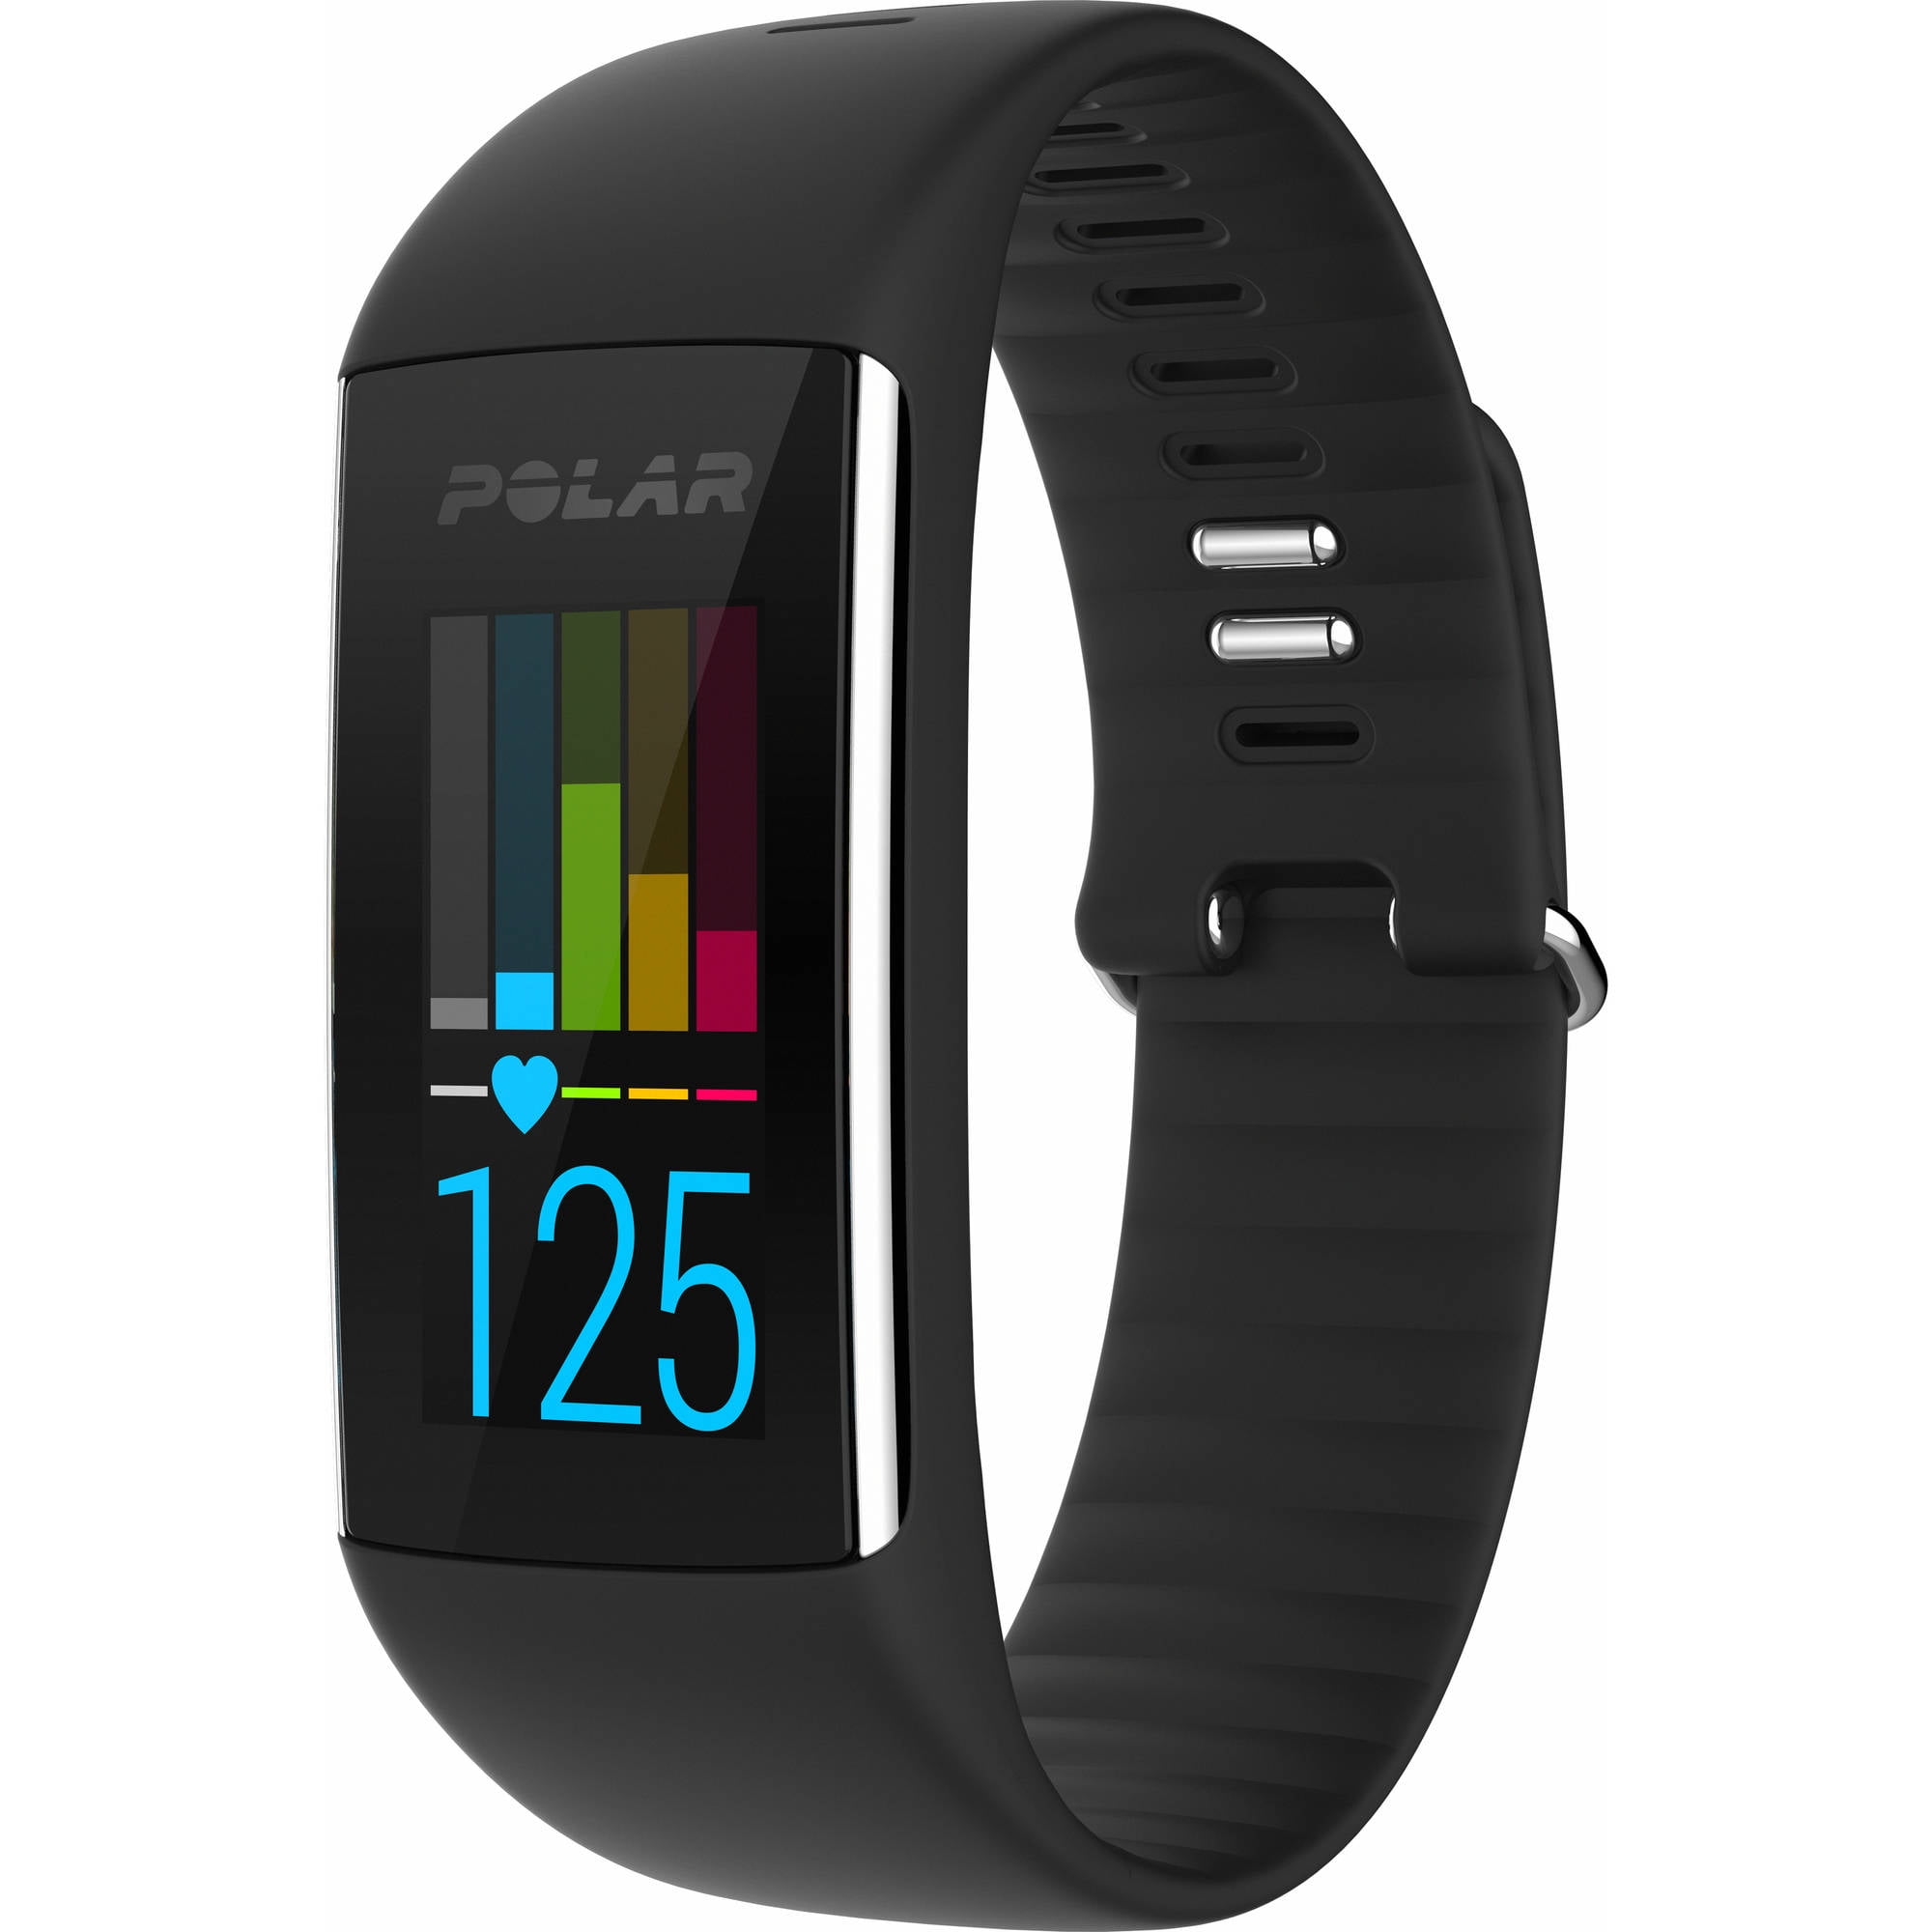 polar-a360-fitness-tracker-with-wrist-heart-rate-monitor-walmart